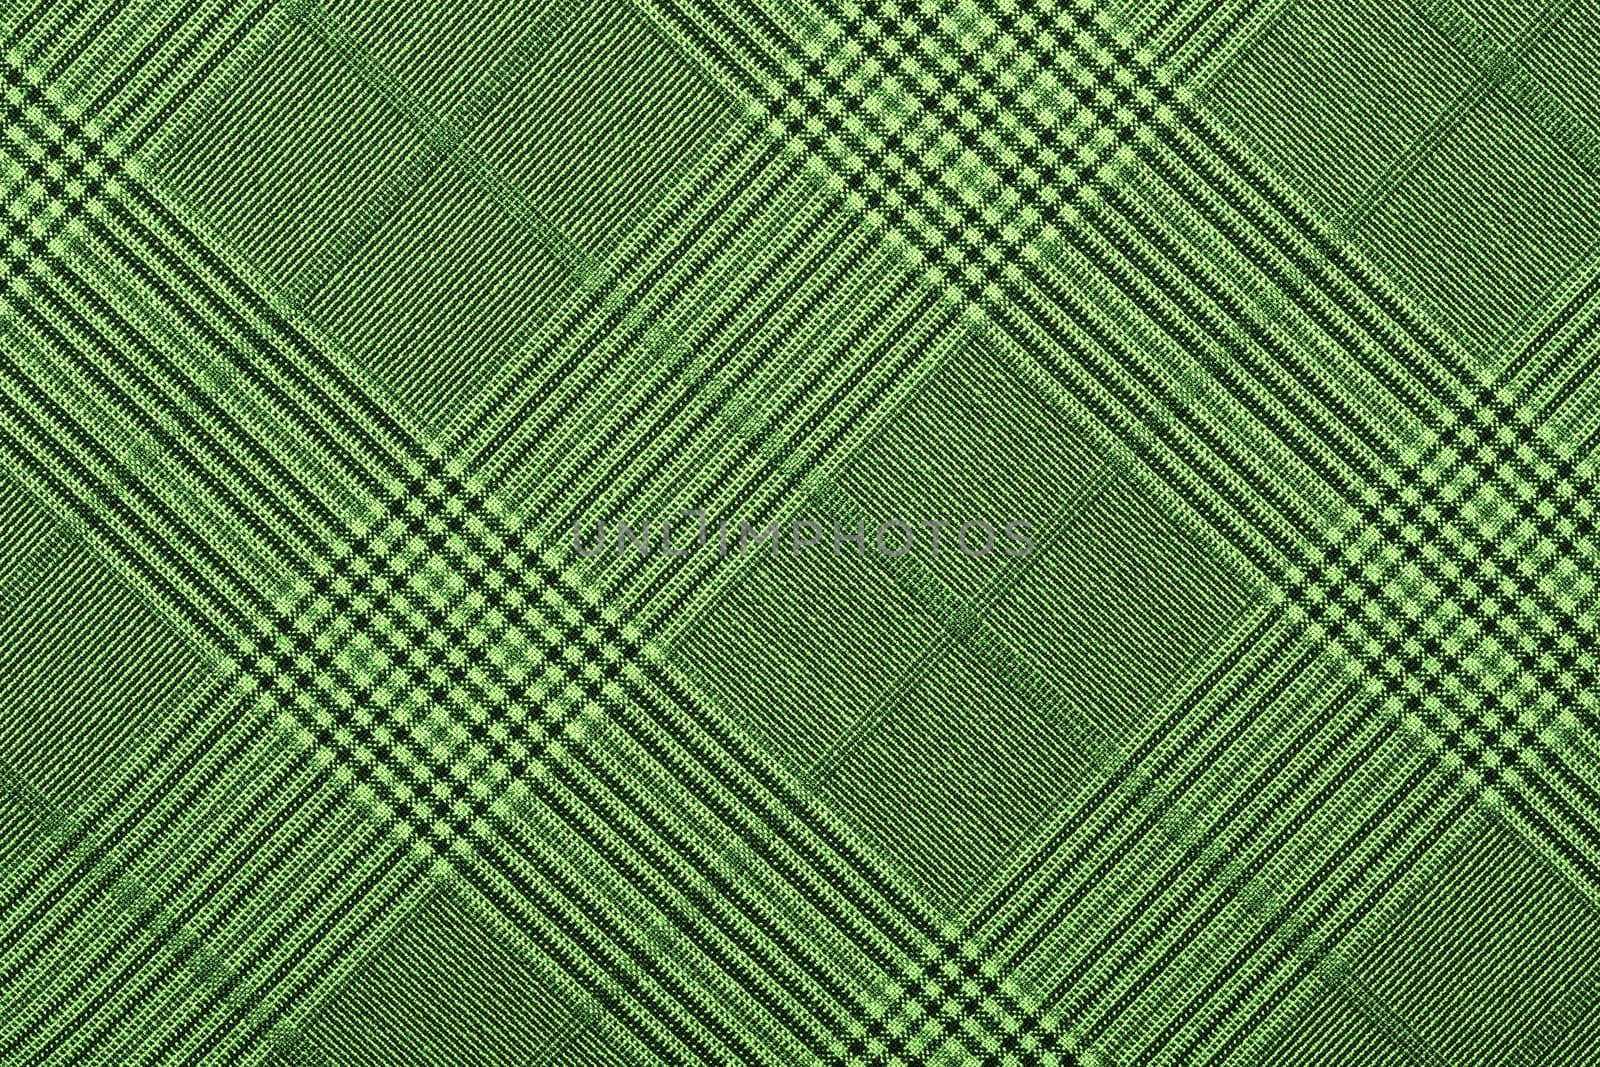 Green material in geometric patterns, a background or texture